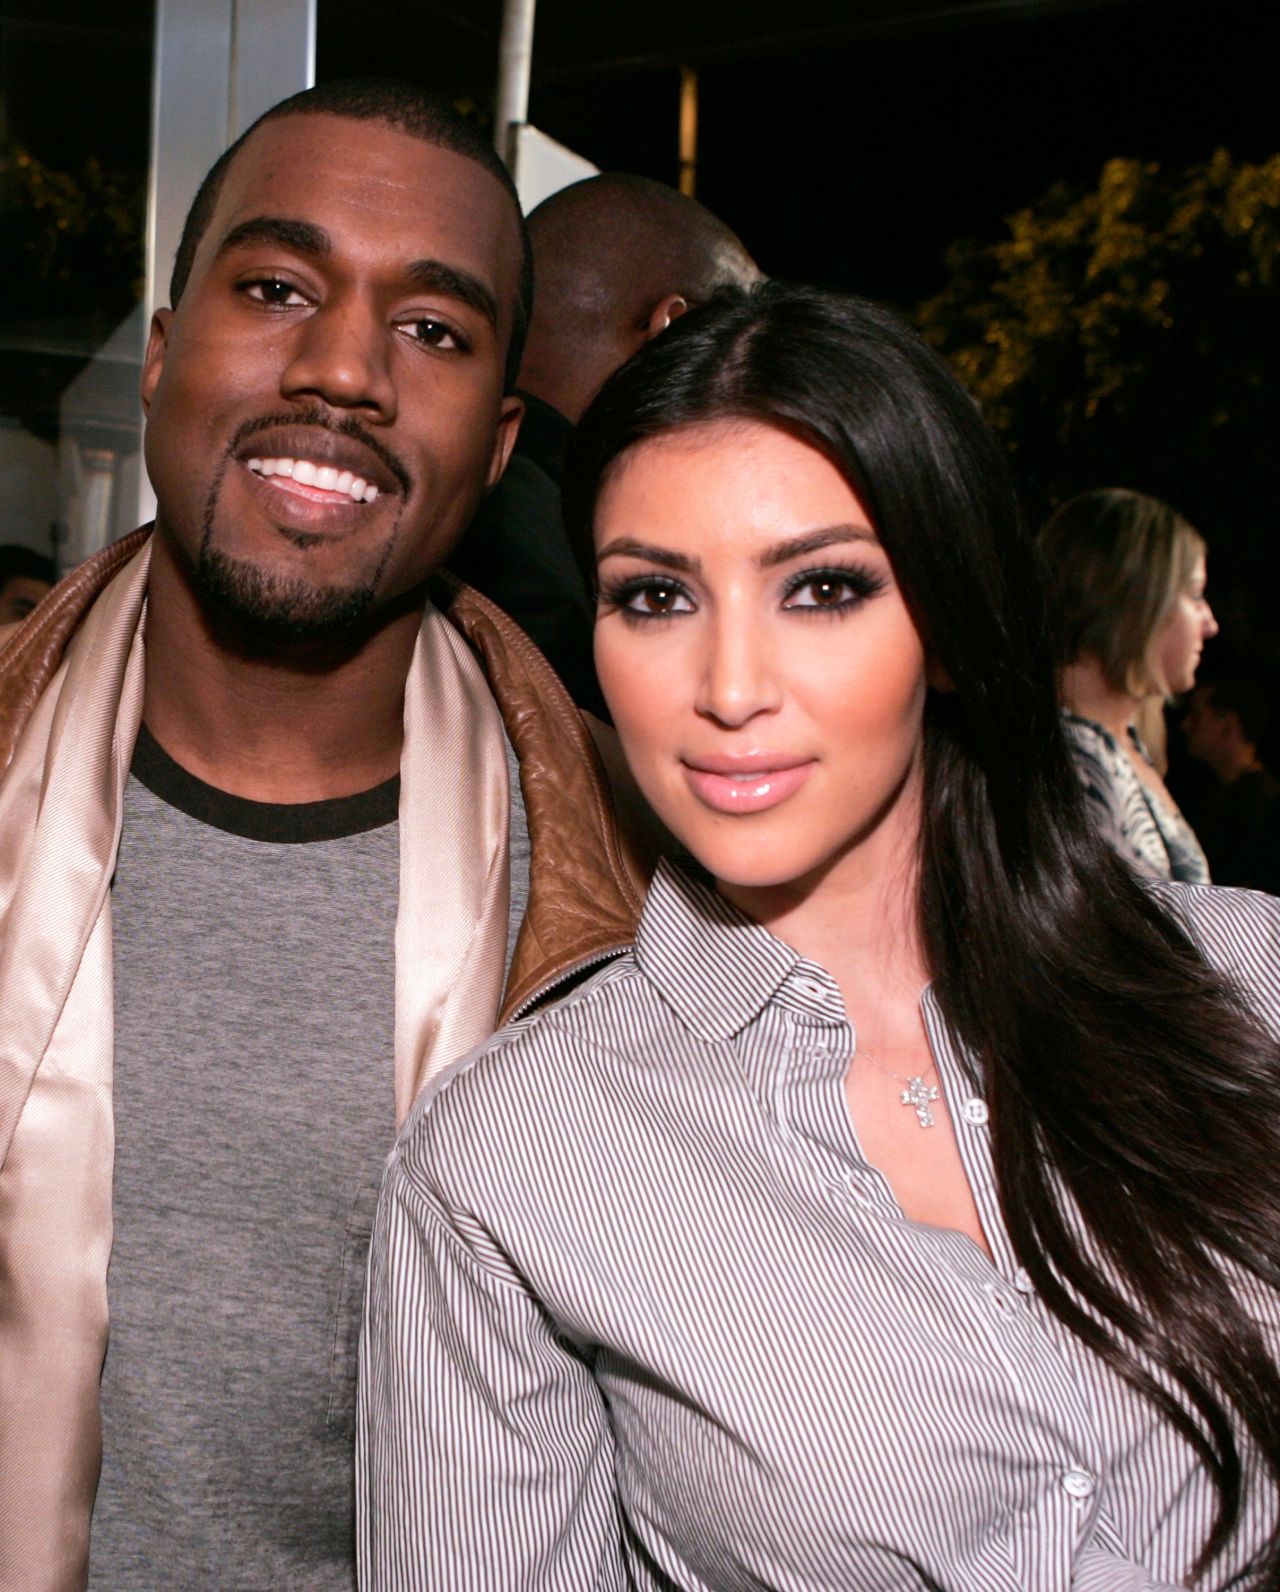 Kim and Kanye attend the grand opening of an Intermix clothing store in 2007. They first met in the early 2000s, but it would be years before they became romantically involved.